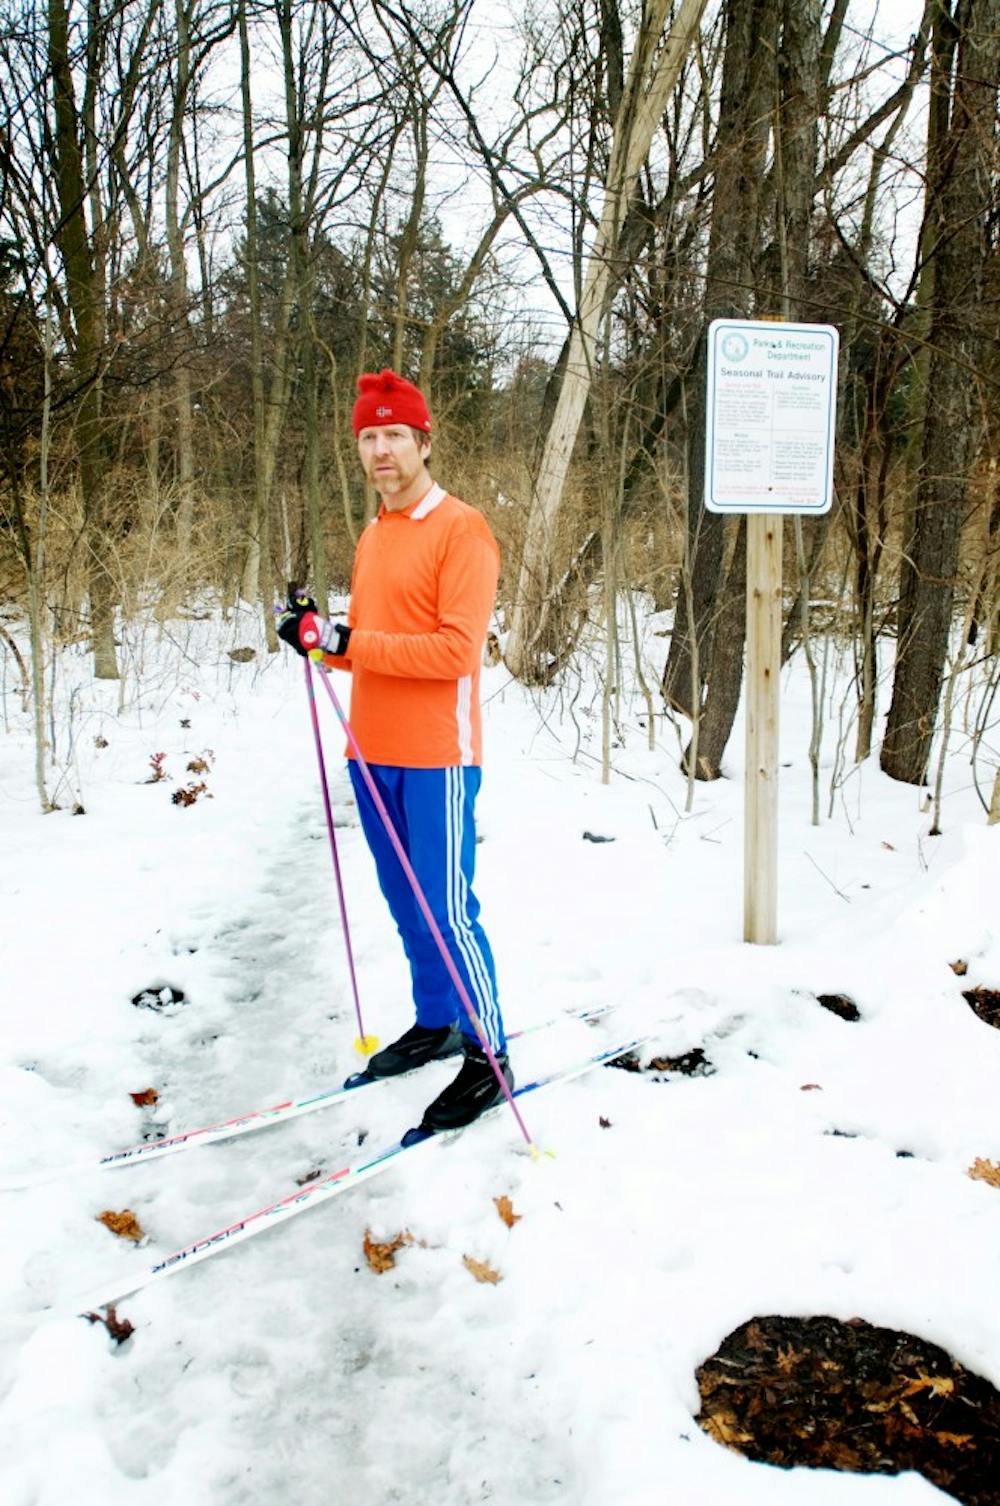 	<p>Jeff Potter stands at the beginning of the Ted Black Woods Park in Okemos where he spends a lot of time cross-country skiing. Nearly 20 years ago, Potter’s love of journalism and the outdoors led him to begin his own independent outdoor culture company called Out Your Backdoor. He sells gear and hard-to-find books, as well as gathers articles about the outdoors.</p>